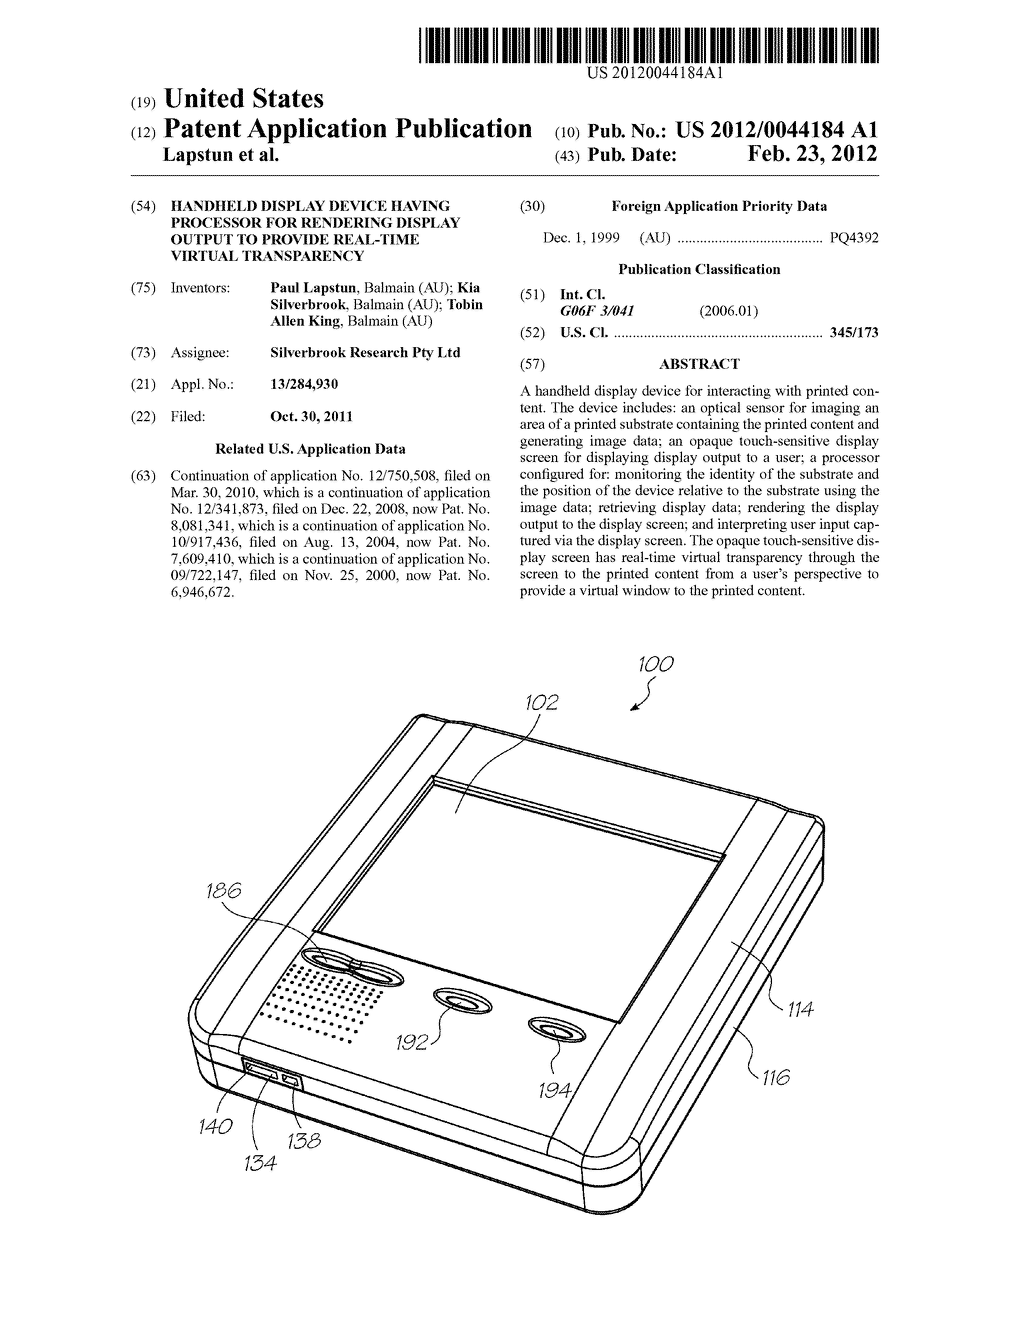 HANDHELD DISPLAY DEVICE HAVING PROCESSOR FOR RENDERING DISPLAY OUTPUT TO     PROVIDE REAL-TIME VIRTUAL TRANSPARENCY - diagram, schematic, and image 01